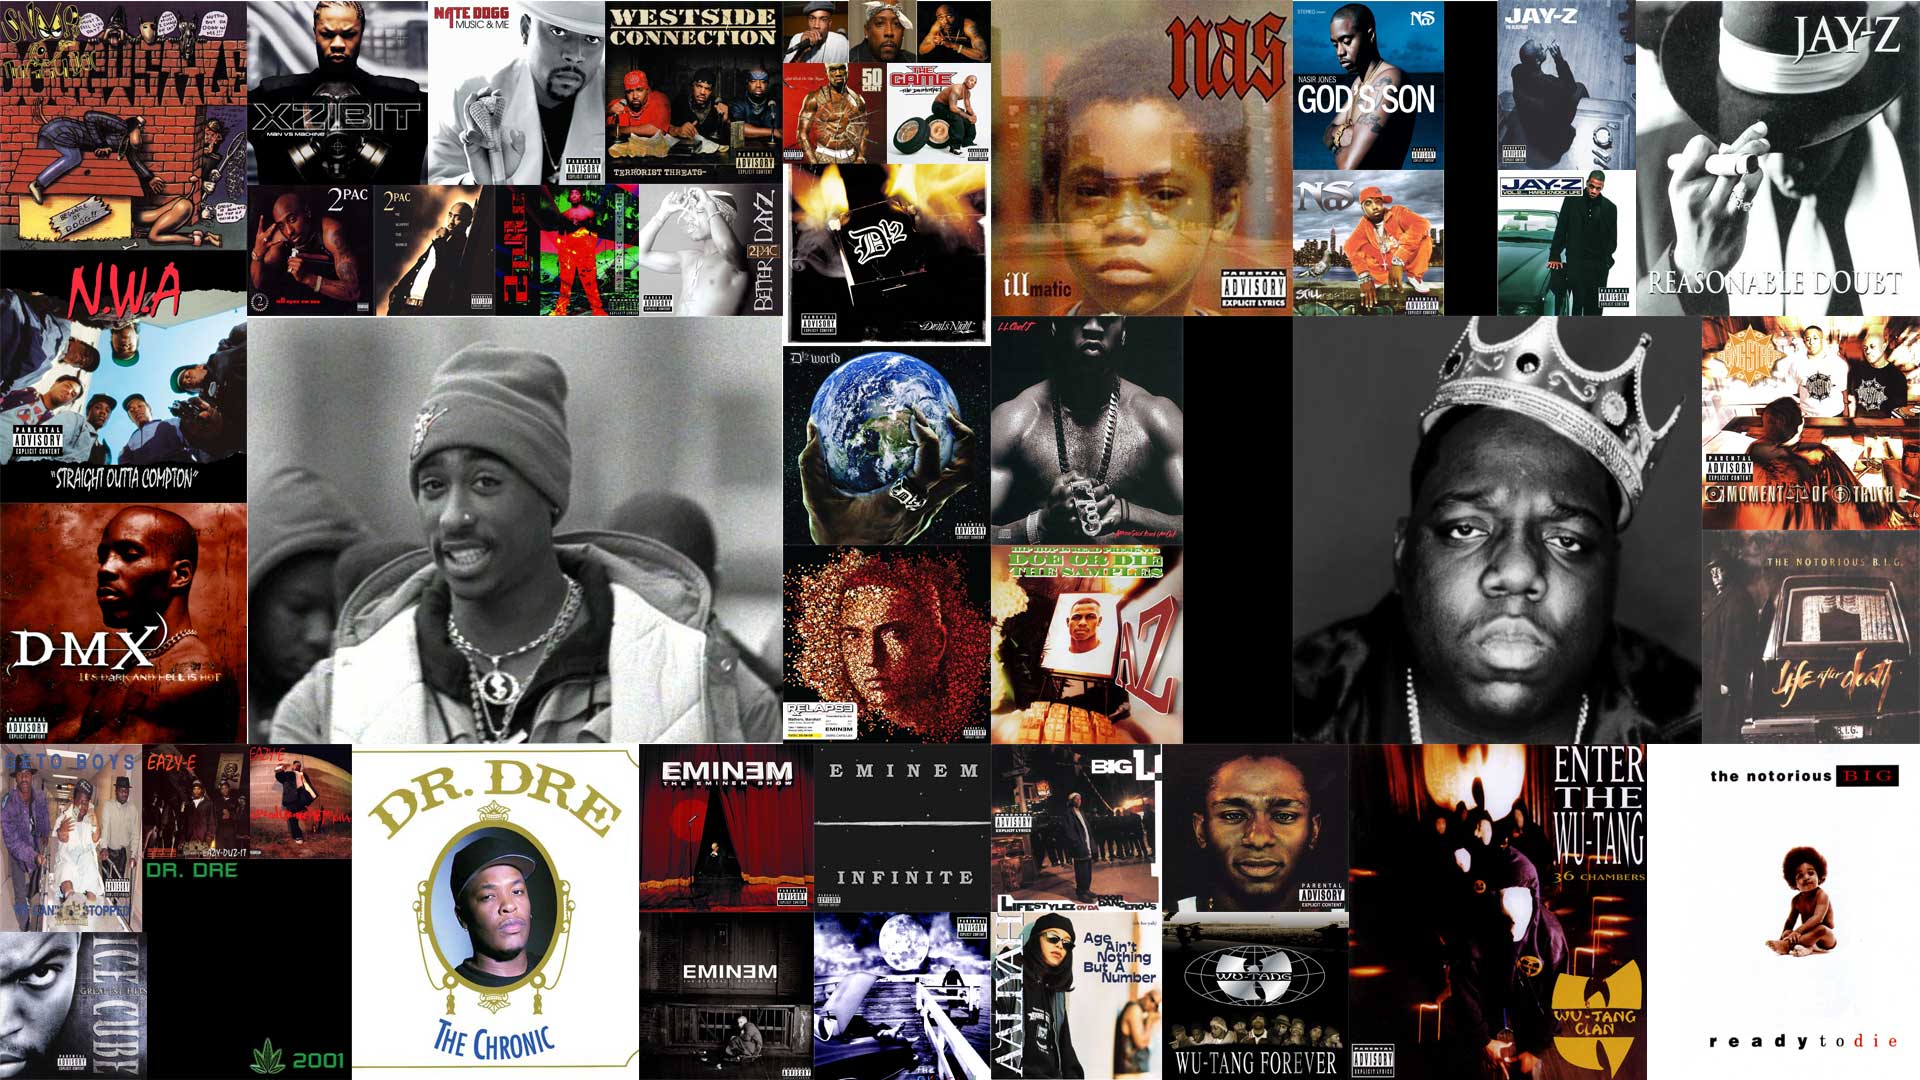 Just made a 1920x1080 wallpaper of all the persons and their albums that in my opinion has made hiphop! Feel free to use the image as a wallpaper!